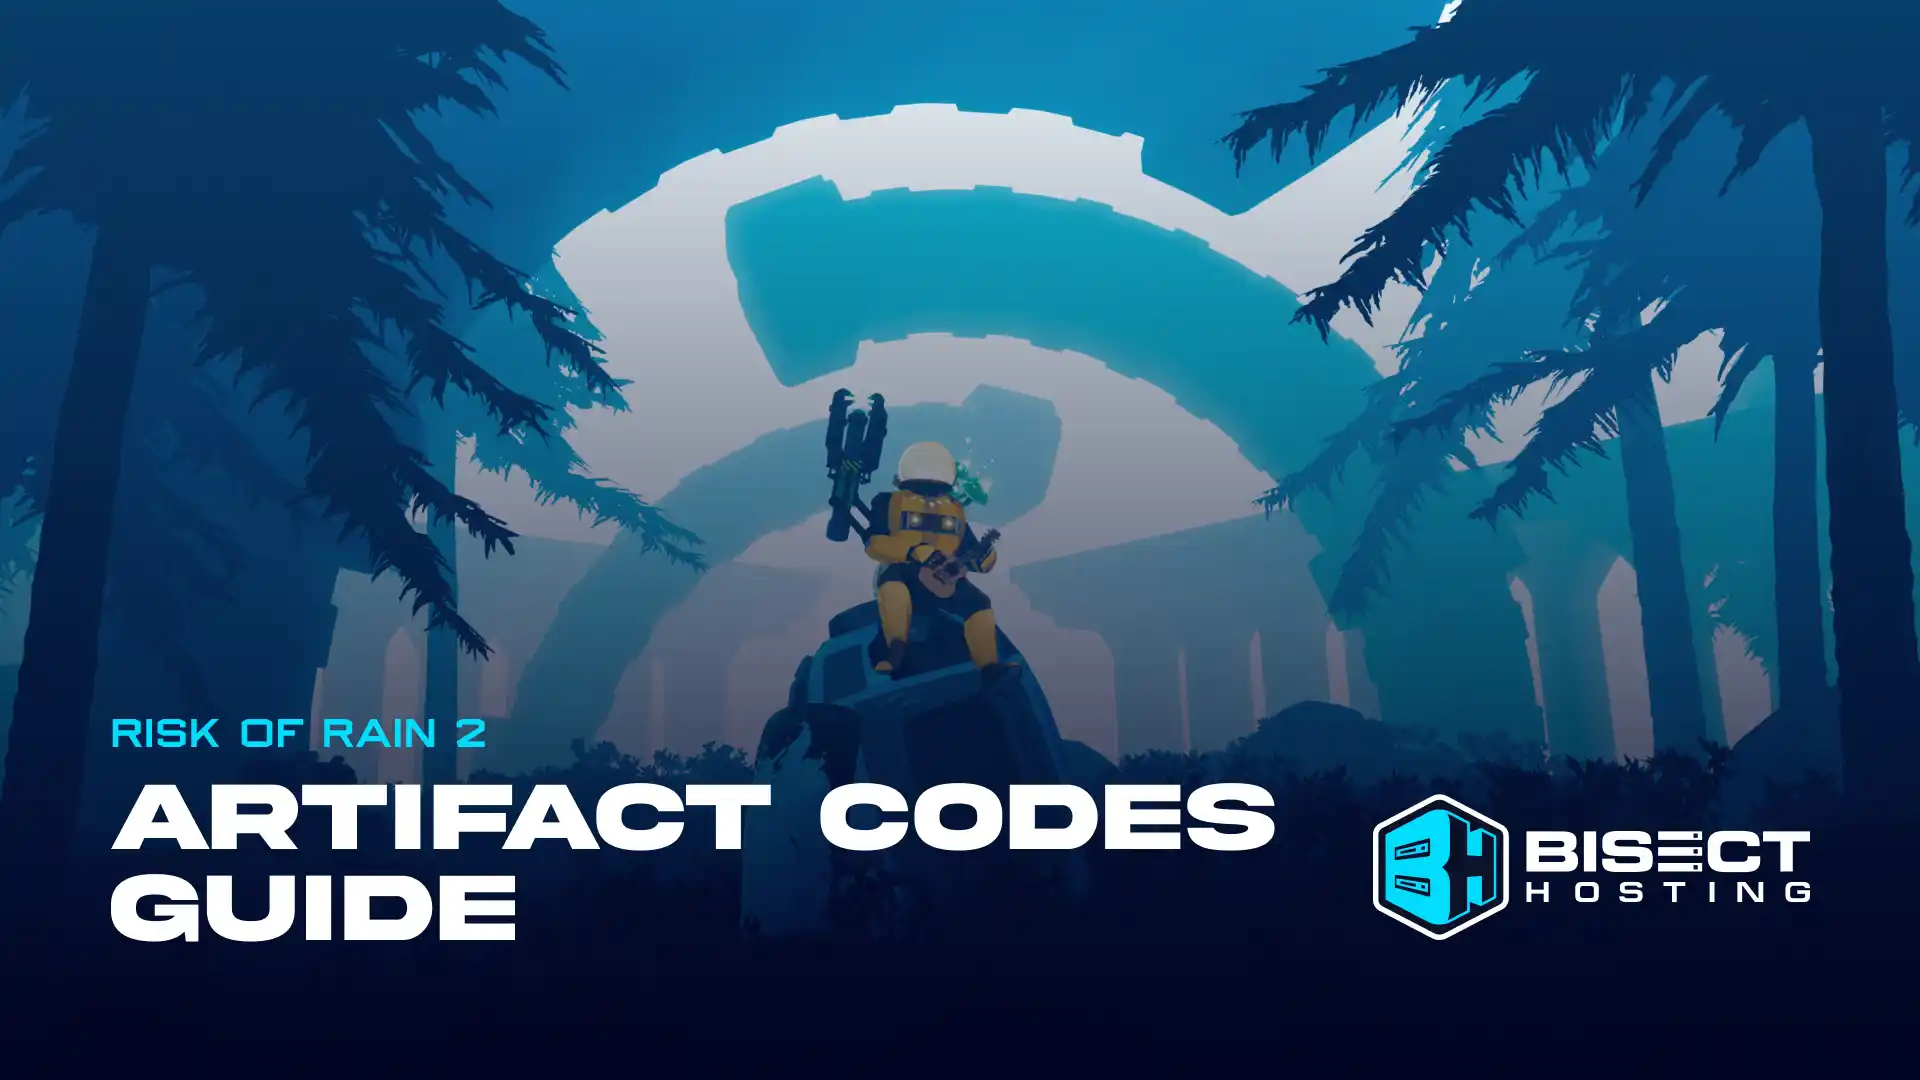 Risk of Rain 2 Artifact Codes - All Artifacts, Effects, & Where to Enter